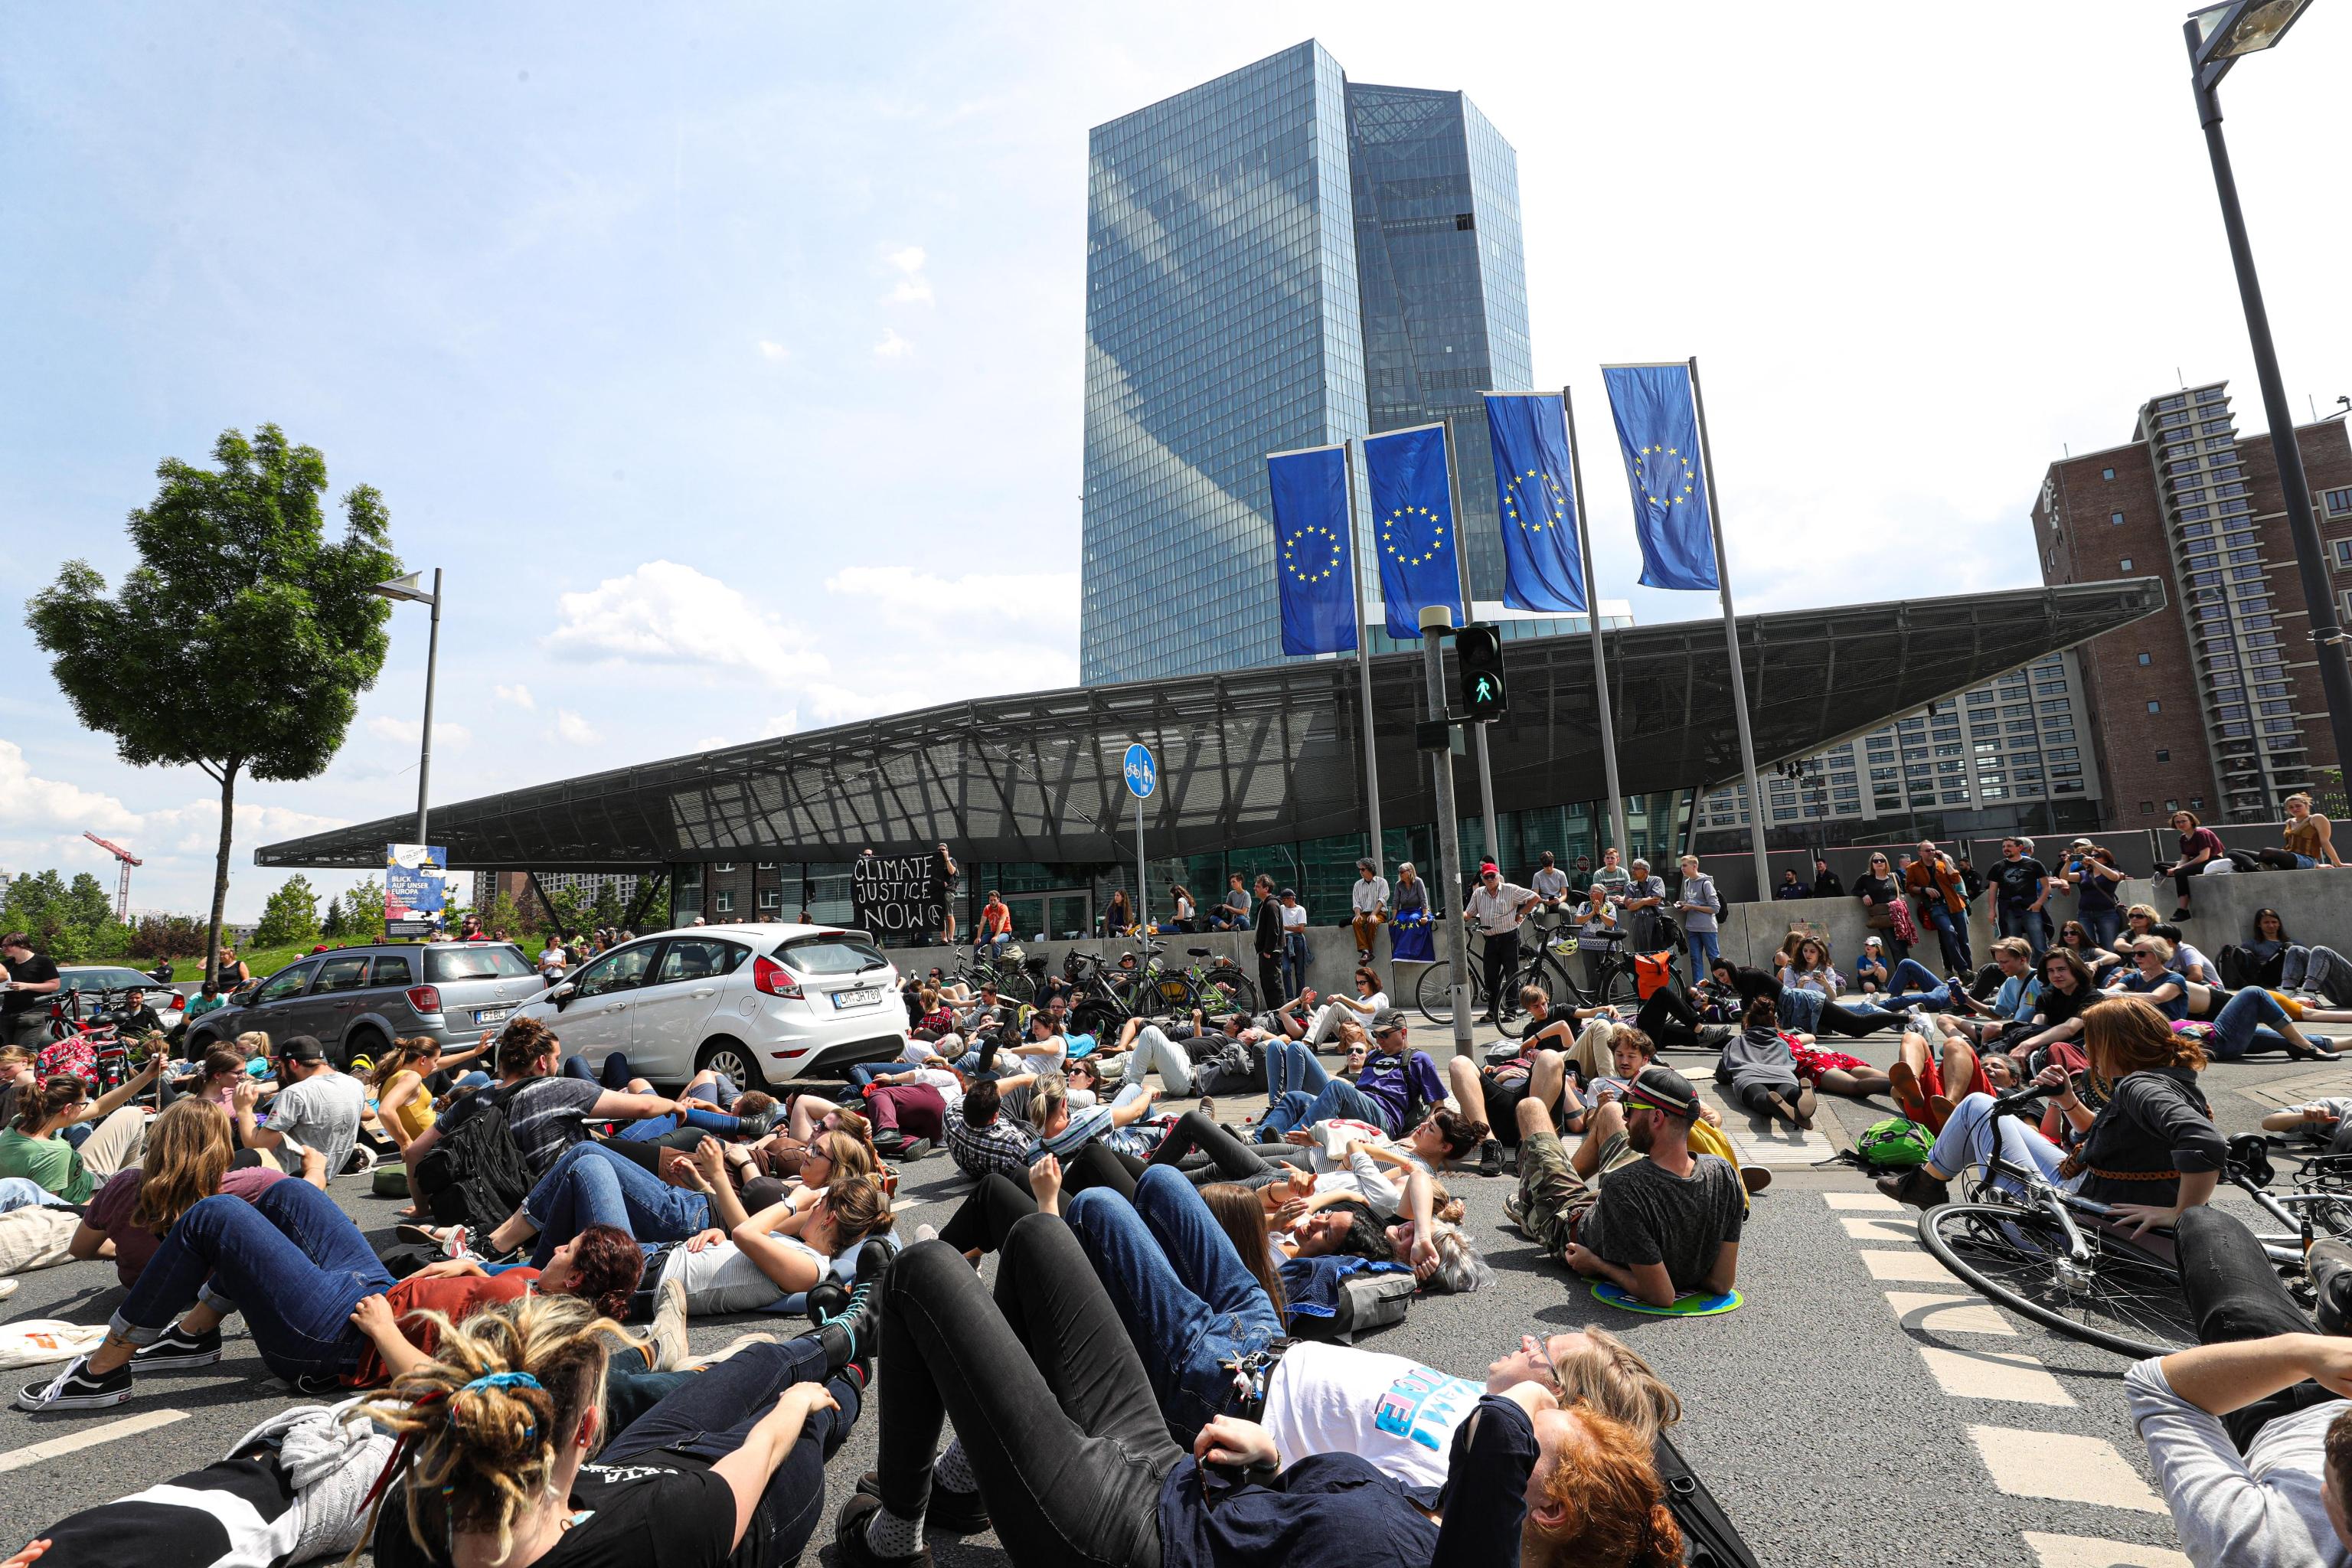 epa07597129 Students take part in a demonstration against climate change in front of the European Central Bank (ECB), in Frankfurt Main, Germany, 24 May 2019. Youth and students across the world are taking part in a student strike movement called #FridayForFuture which was sparked by Greta Thunberg of Sweden, a sixteen year old climate activist who has been protesting outside the Swedish parliament every Friday since August 2018.  EPA/ARMANDO BABANI